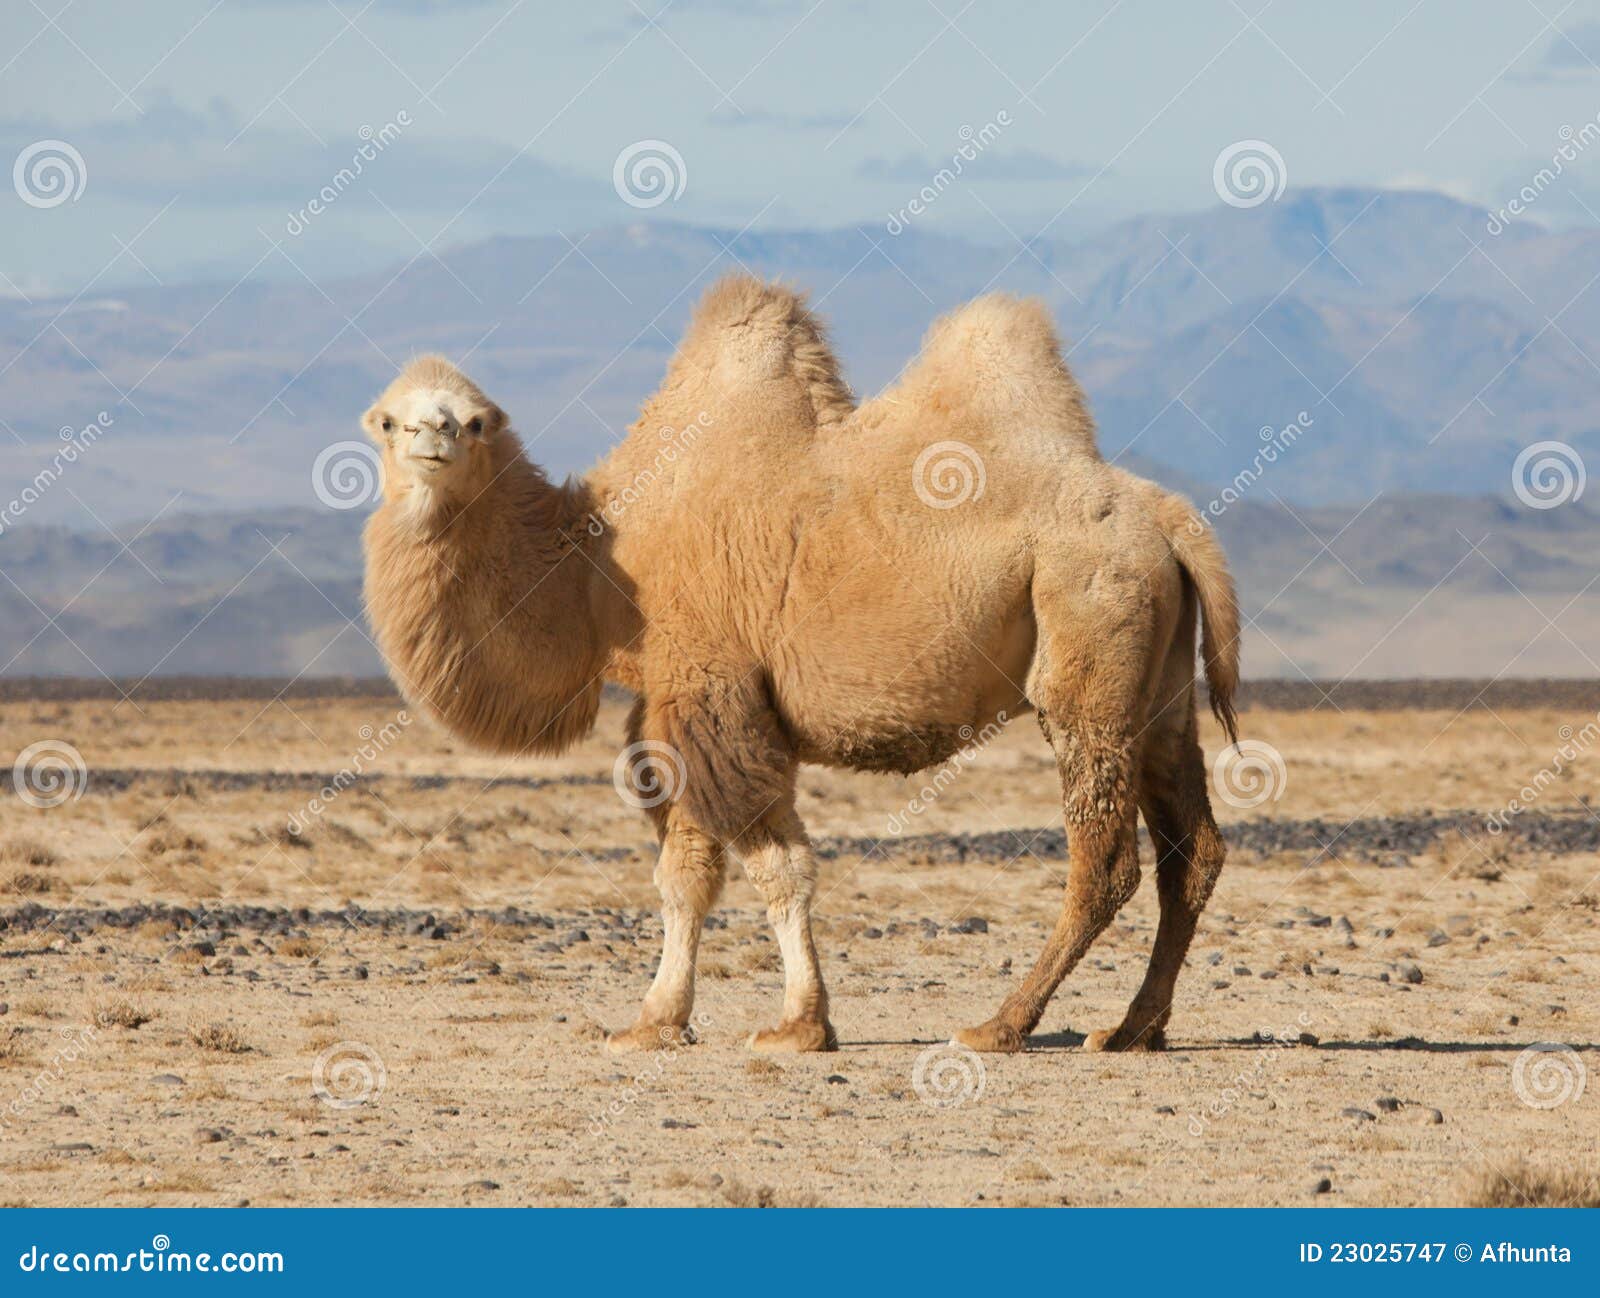 bactrian camel in the steppes of mongolia